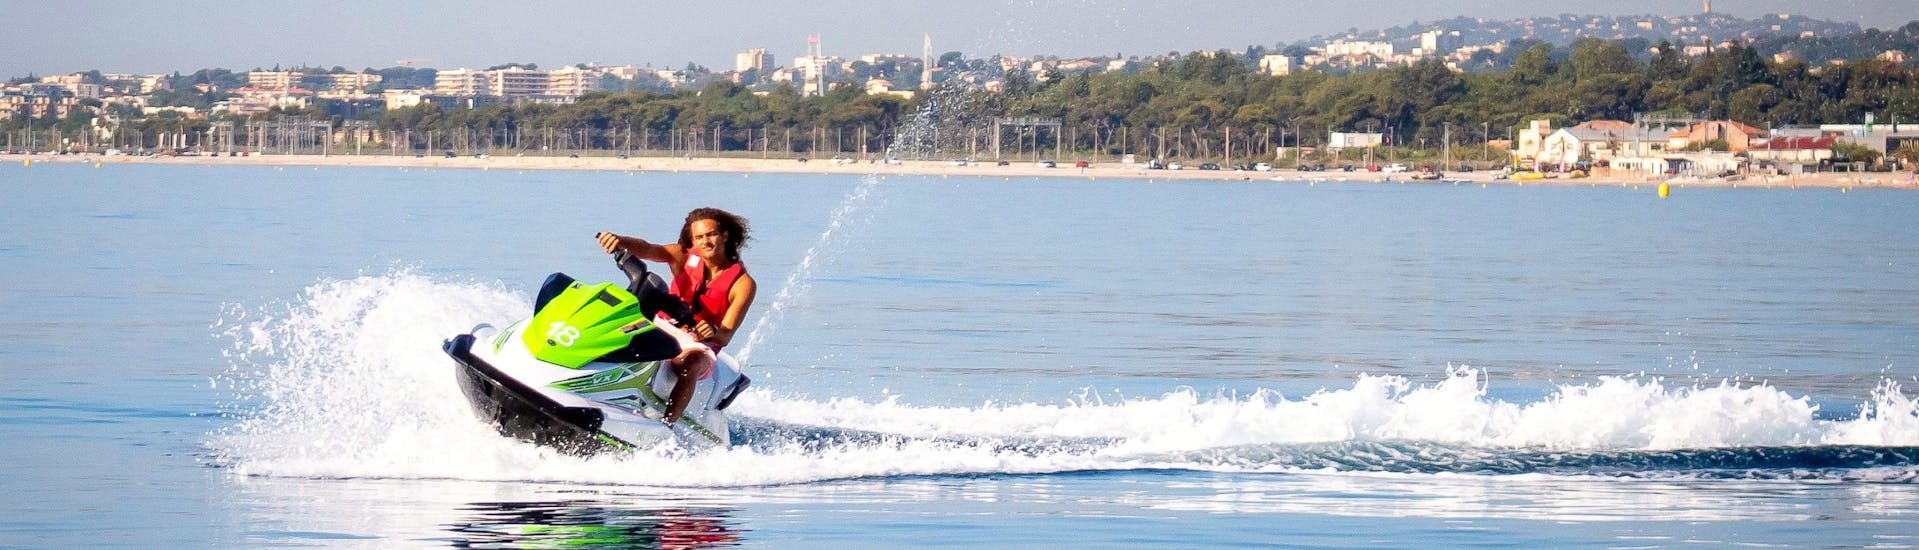 A man is having fun while jet skiing during his Jet Ski Tour in Villeneuve-Loubet with Plage des Marines.